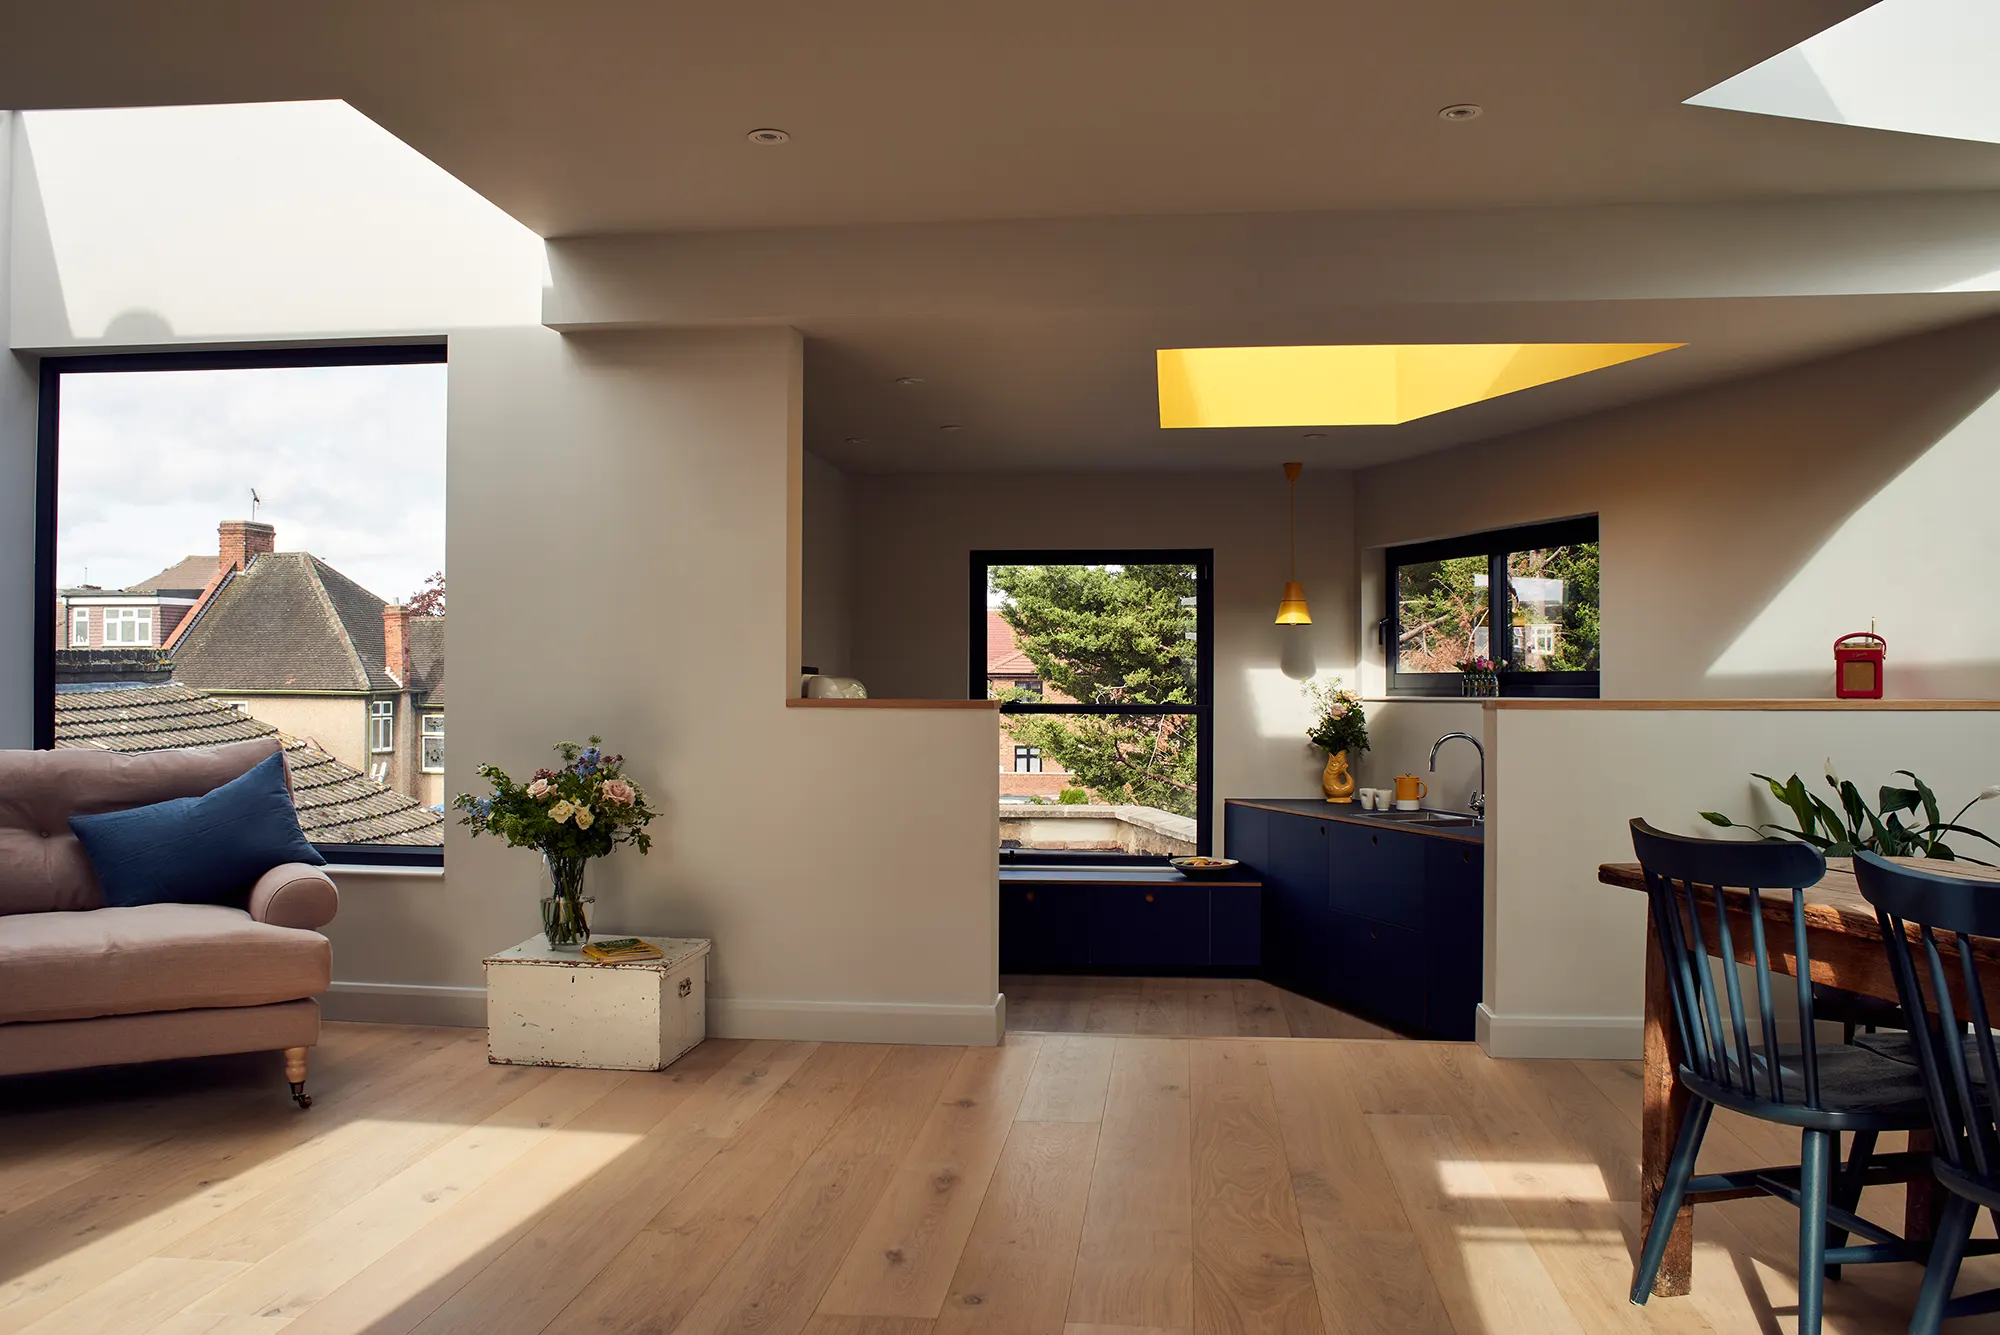 Attic converted to living space with rooflights